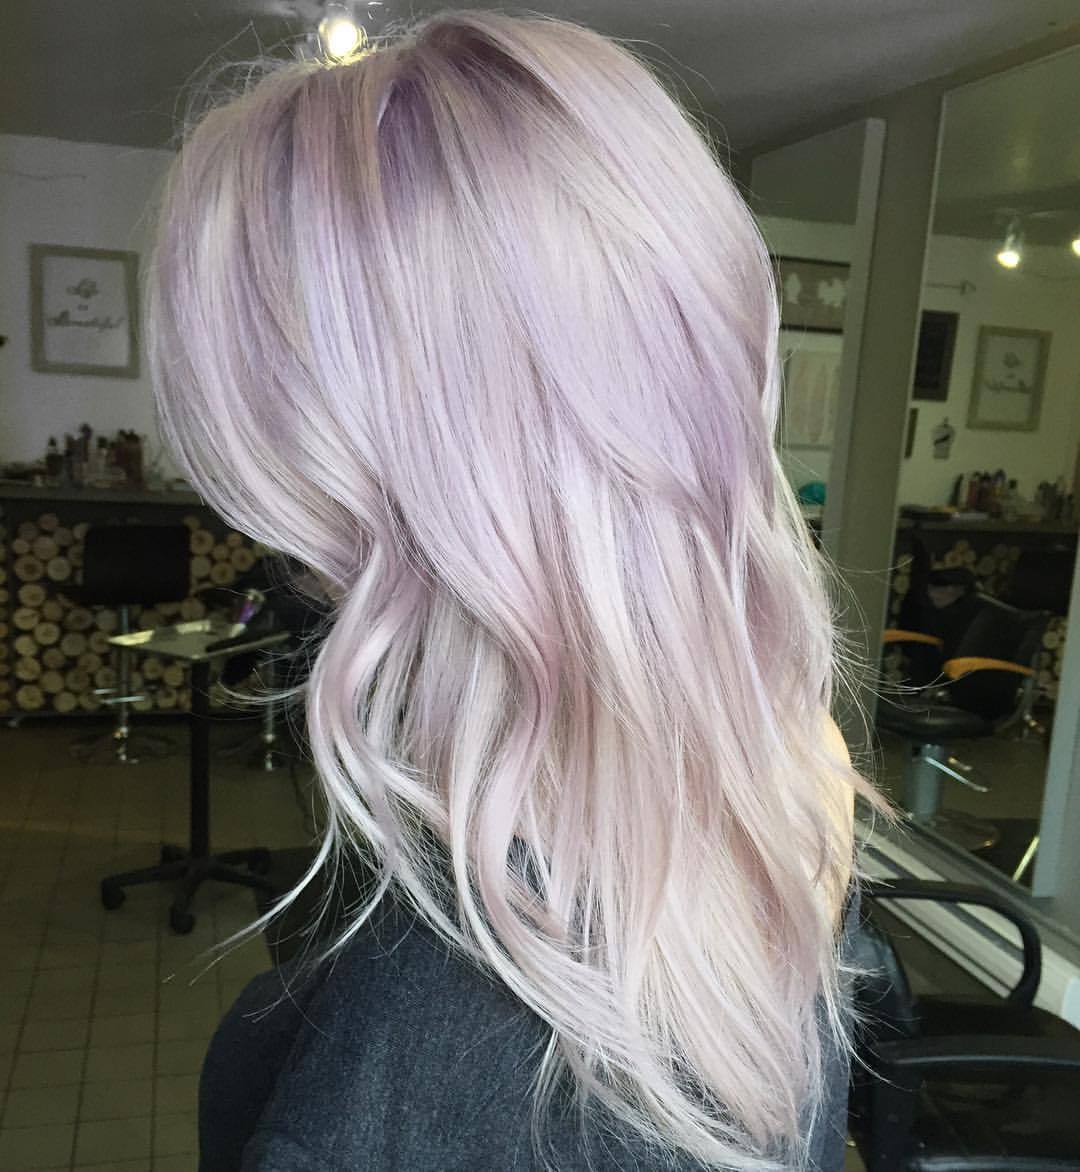 Ombres Blondes And Balayage A Touch Of Lilac For This Blonde